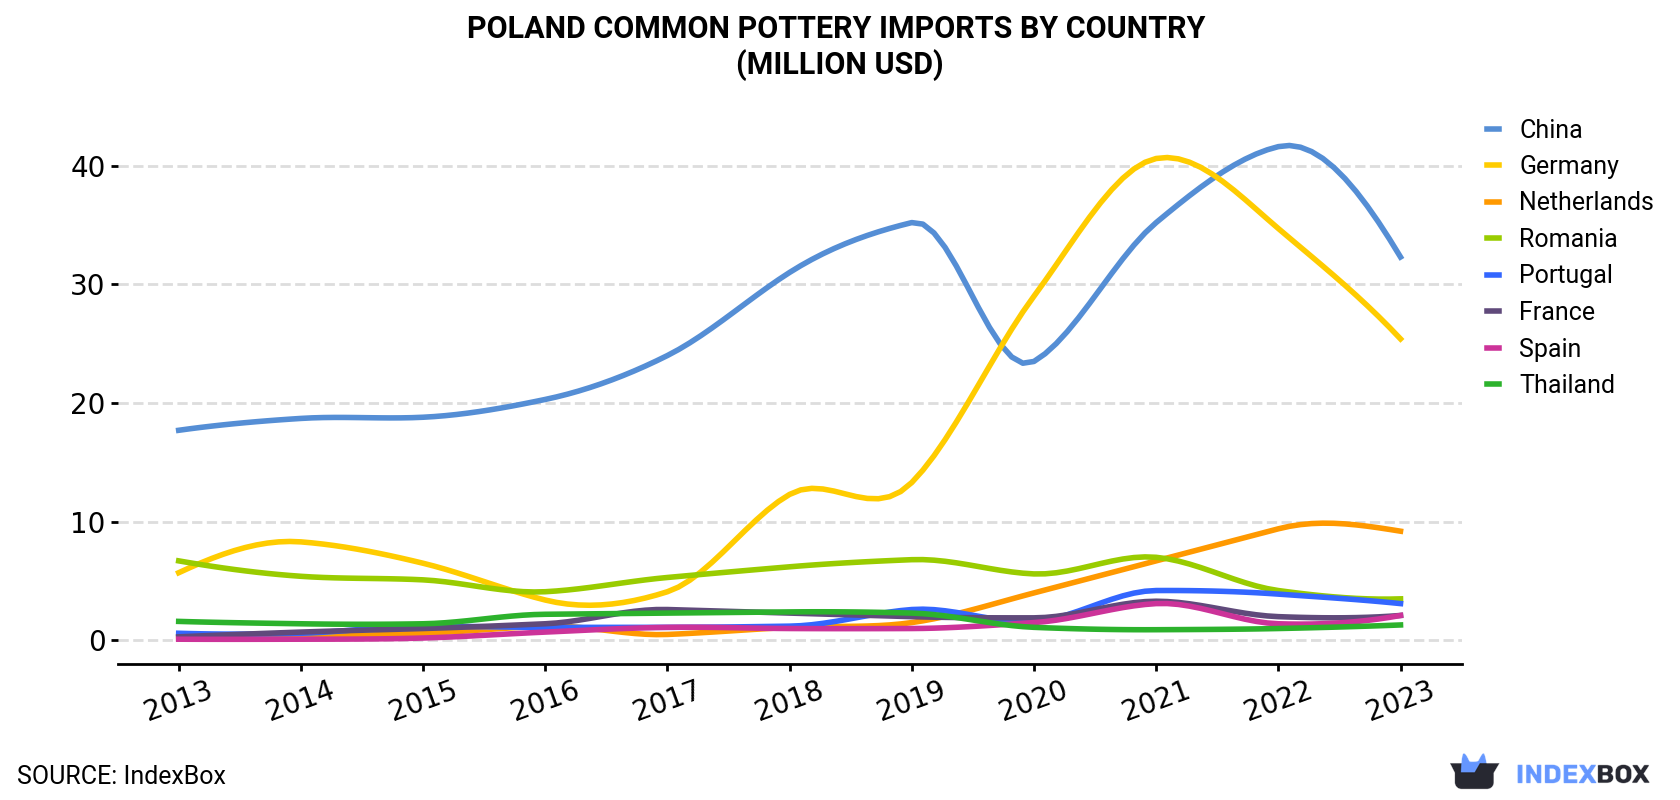 Poland Common Pottery Imports By Country (Million USD)